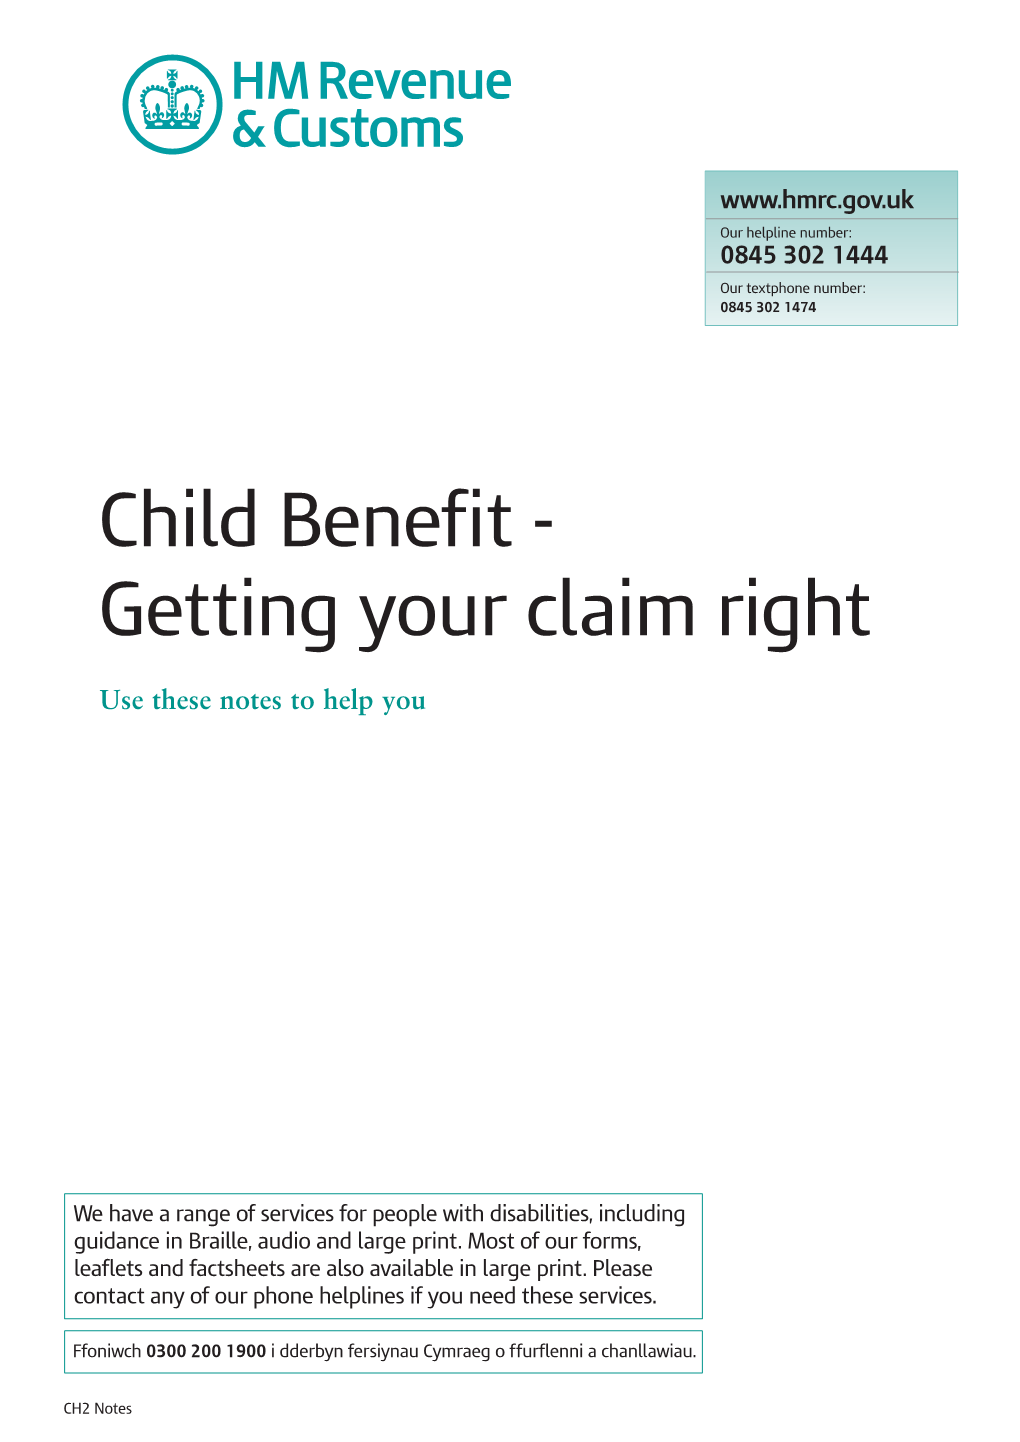 Child Benefit - Getting Your Claim Right